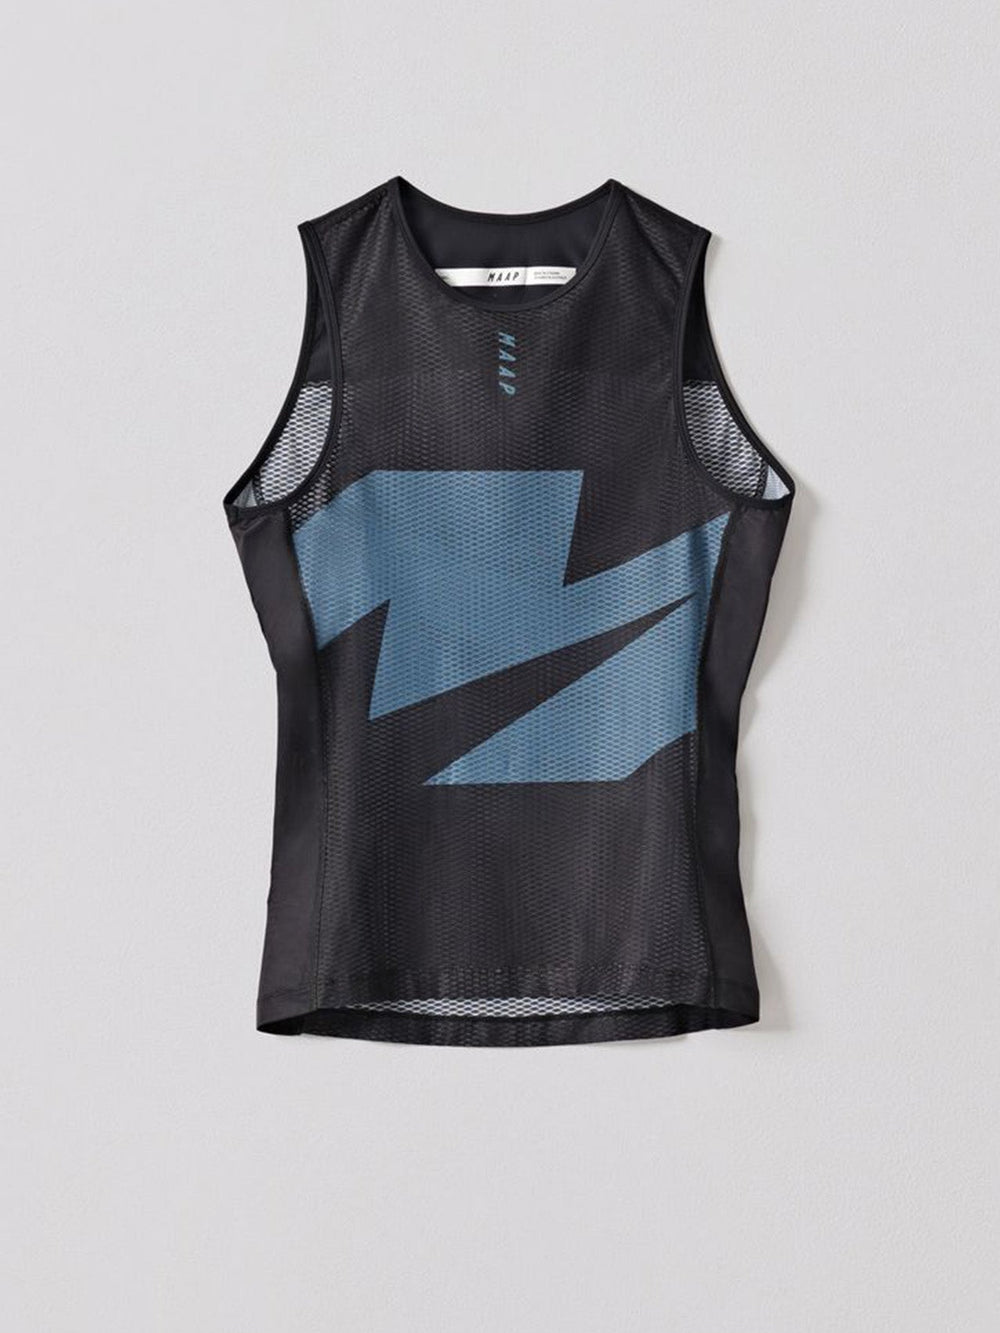 Product Image for Evolve Team Base Layer